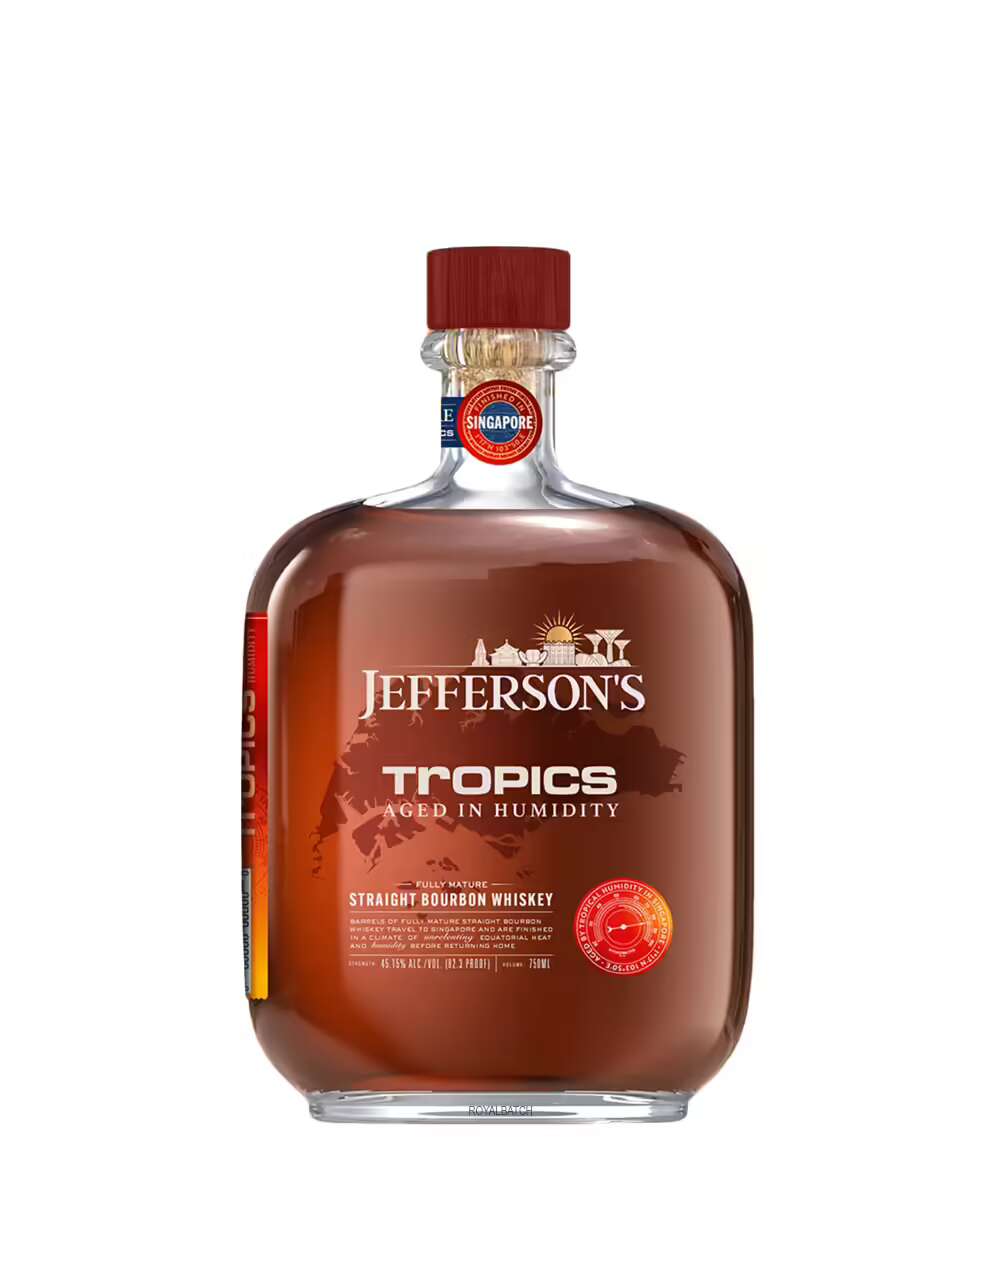 Jeffersons Tropics Aged in Humidity Straight Bourbon Whiskey